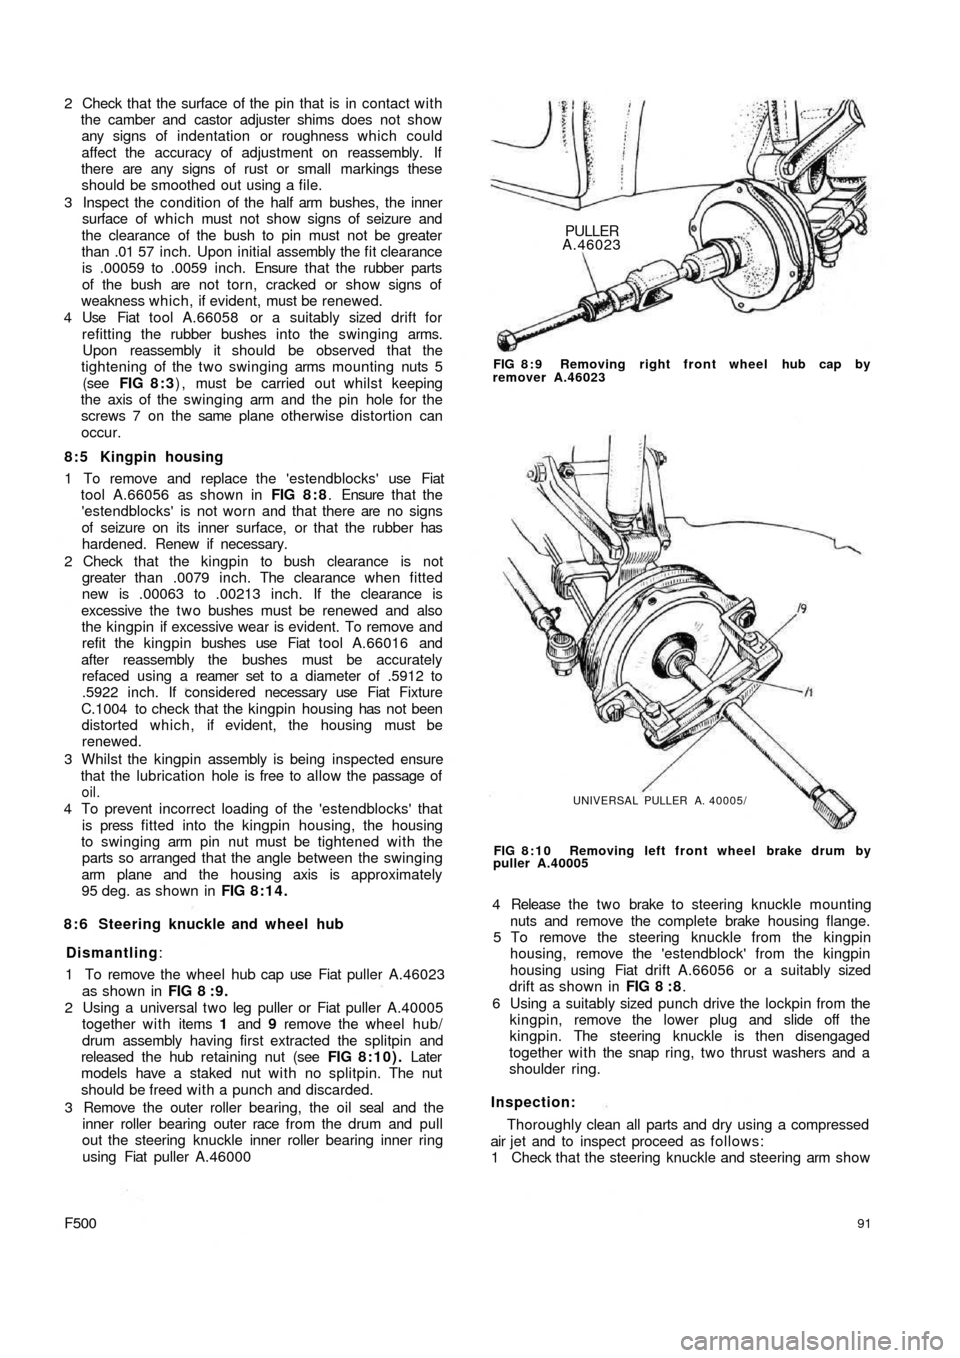 FIAT 500 1957 1.G Workshop Manual 2  Check that the surface of the pin that is in contact with
the camber and castor adjuster shims does not show
any signs of indentation or roughness which could
affect the  accuracy of adjustment on 